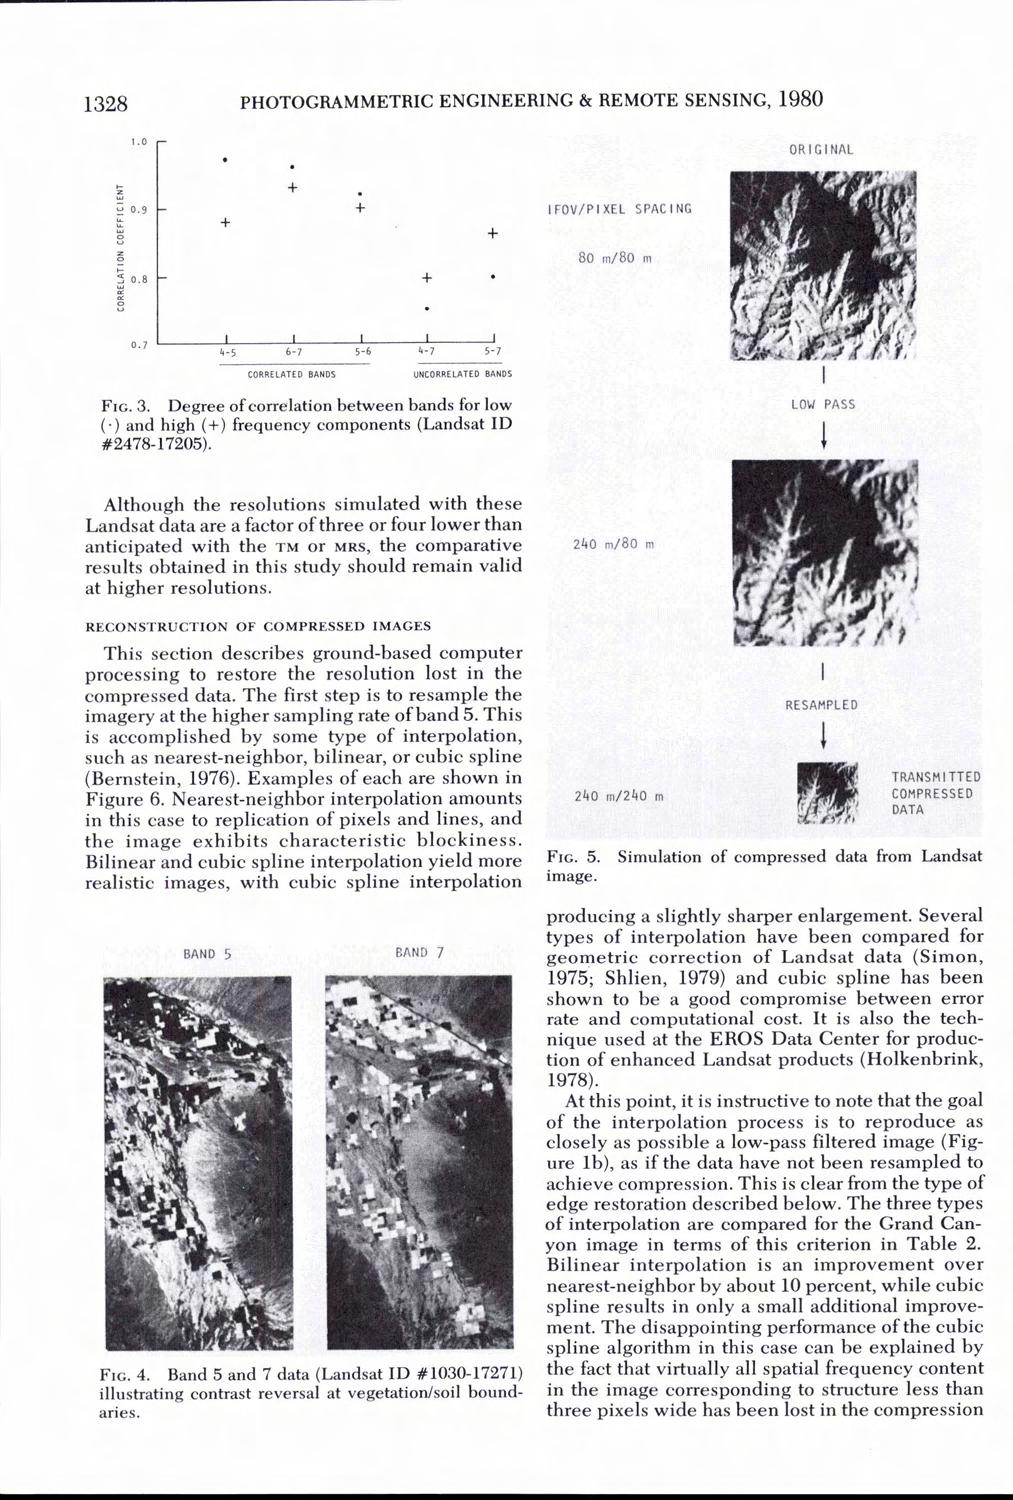 PHOTOGRAMMETRIC ENGINEERING & REMOTE SENSING, 1980 ORIGINAL 0.7 1 I I I I I 4-5 6-7 5-6 4-7 5-7 CORRELATED BANDS UNCORREUTED MNDS FIG. 3. Degree of correlation between bands for low (.